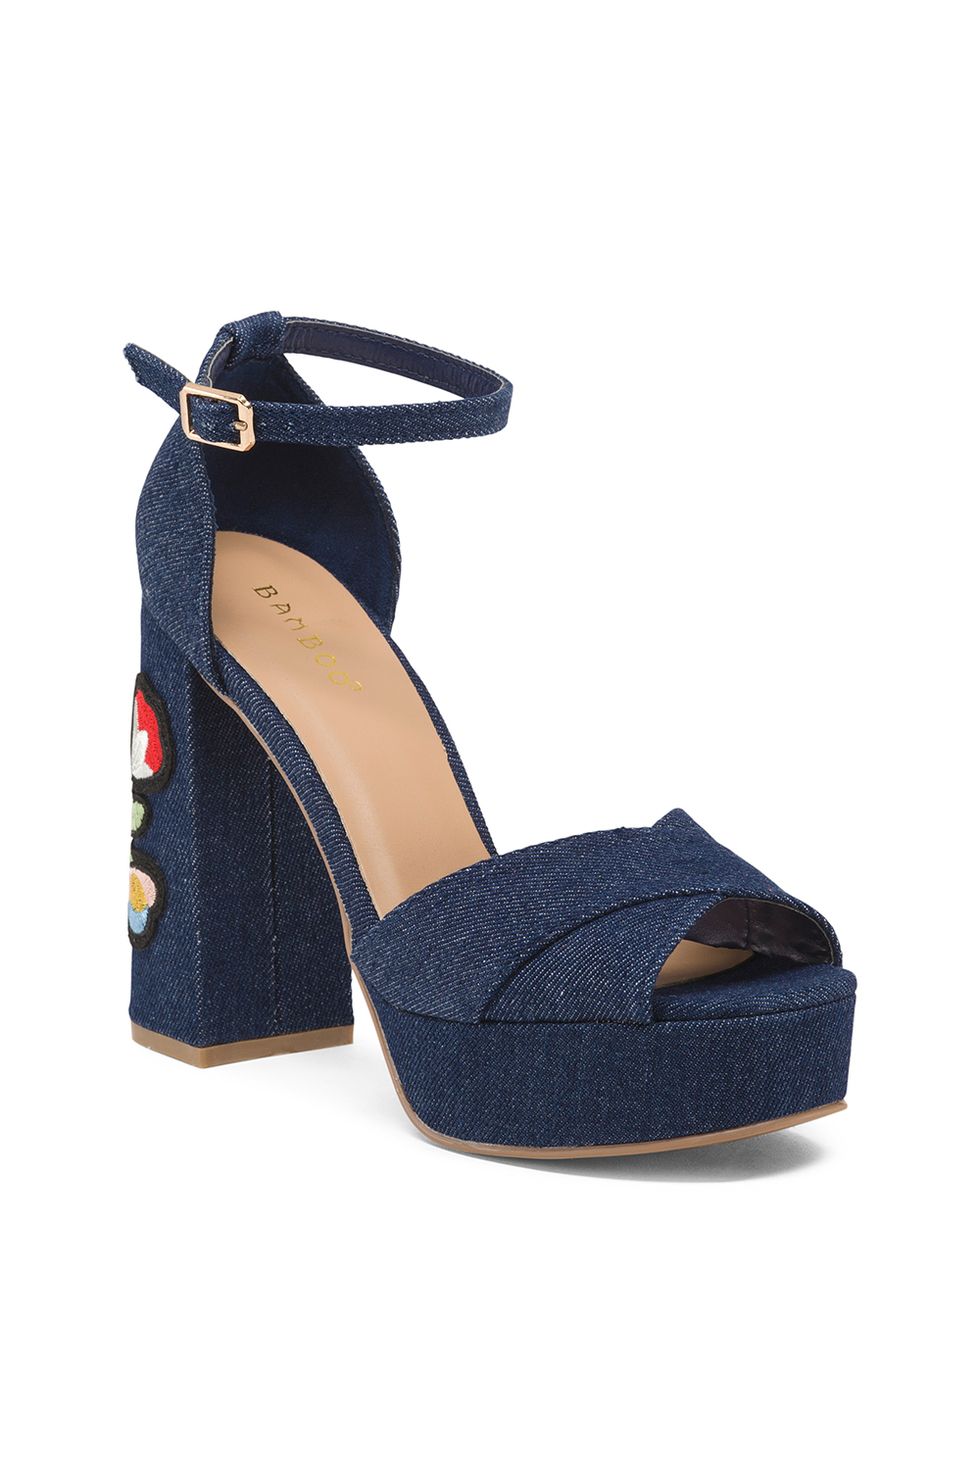 <p>These denim platforms feature cute embroidery on the heel<br><br>
for a little something extra.&nbsp;</p><p><span class="redactor-invisible-space" data-verified="redactor" data-redactor-tag="span" data-redactor-class="redactor-invisible-space"></span></p><p><span class="redactor-invisible-space" data-verified="redactor" data-redactor-tag="span" data-redactor-class="redactor-invisible-space">Bamboo platforms, $24.99; <a href="http://tjmaxx.tjx.com/store/jump/product/shoes-shoes-heels/2pc-Platform-Heels/1000185767?colorId=NS1003468&amp;pos=1:98&amp;N=2374550723" target="_blank" data-tracking-id="recirc-text-link">tjmaxx.com</a></span></p>